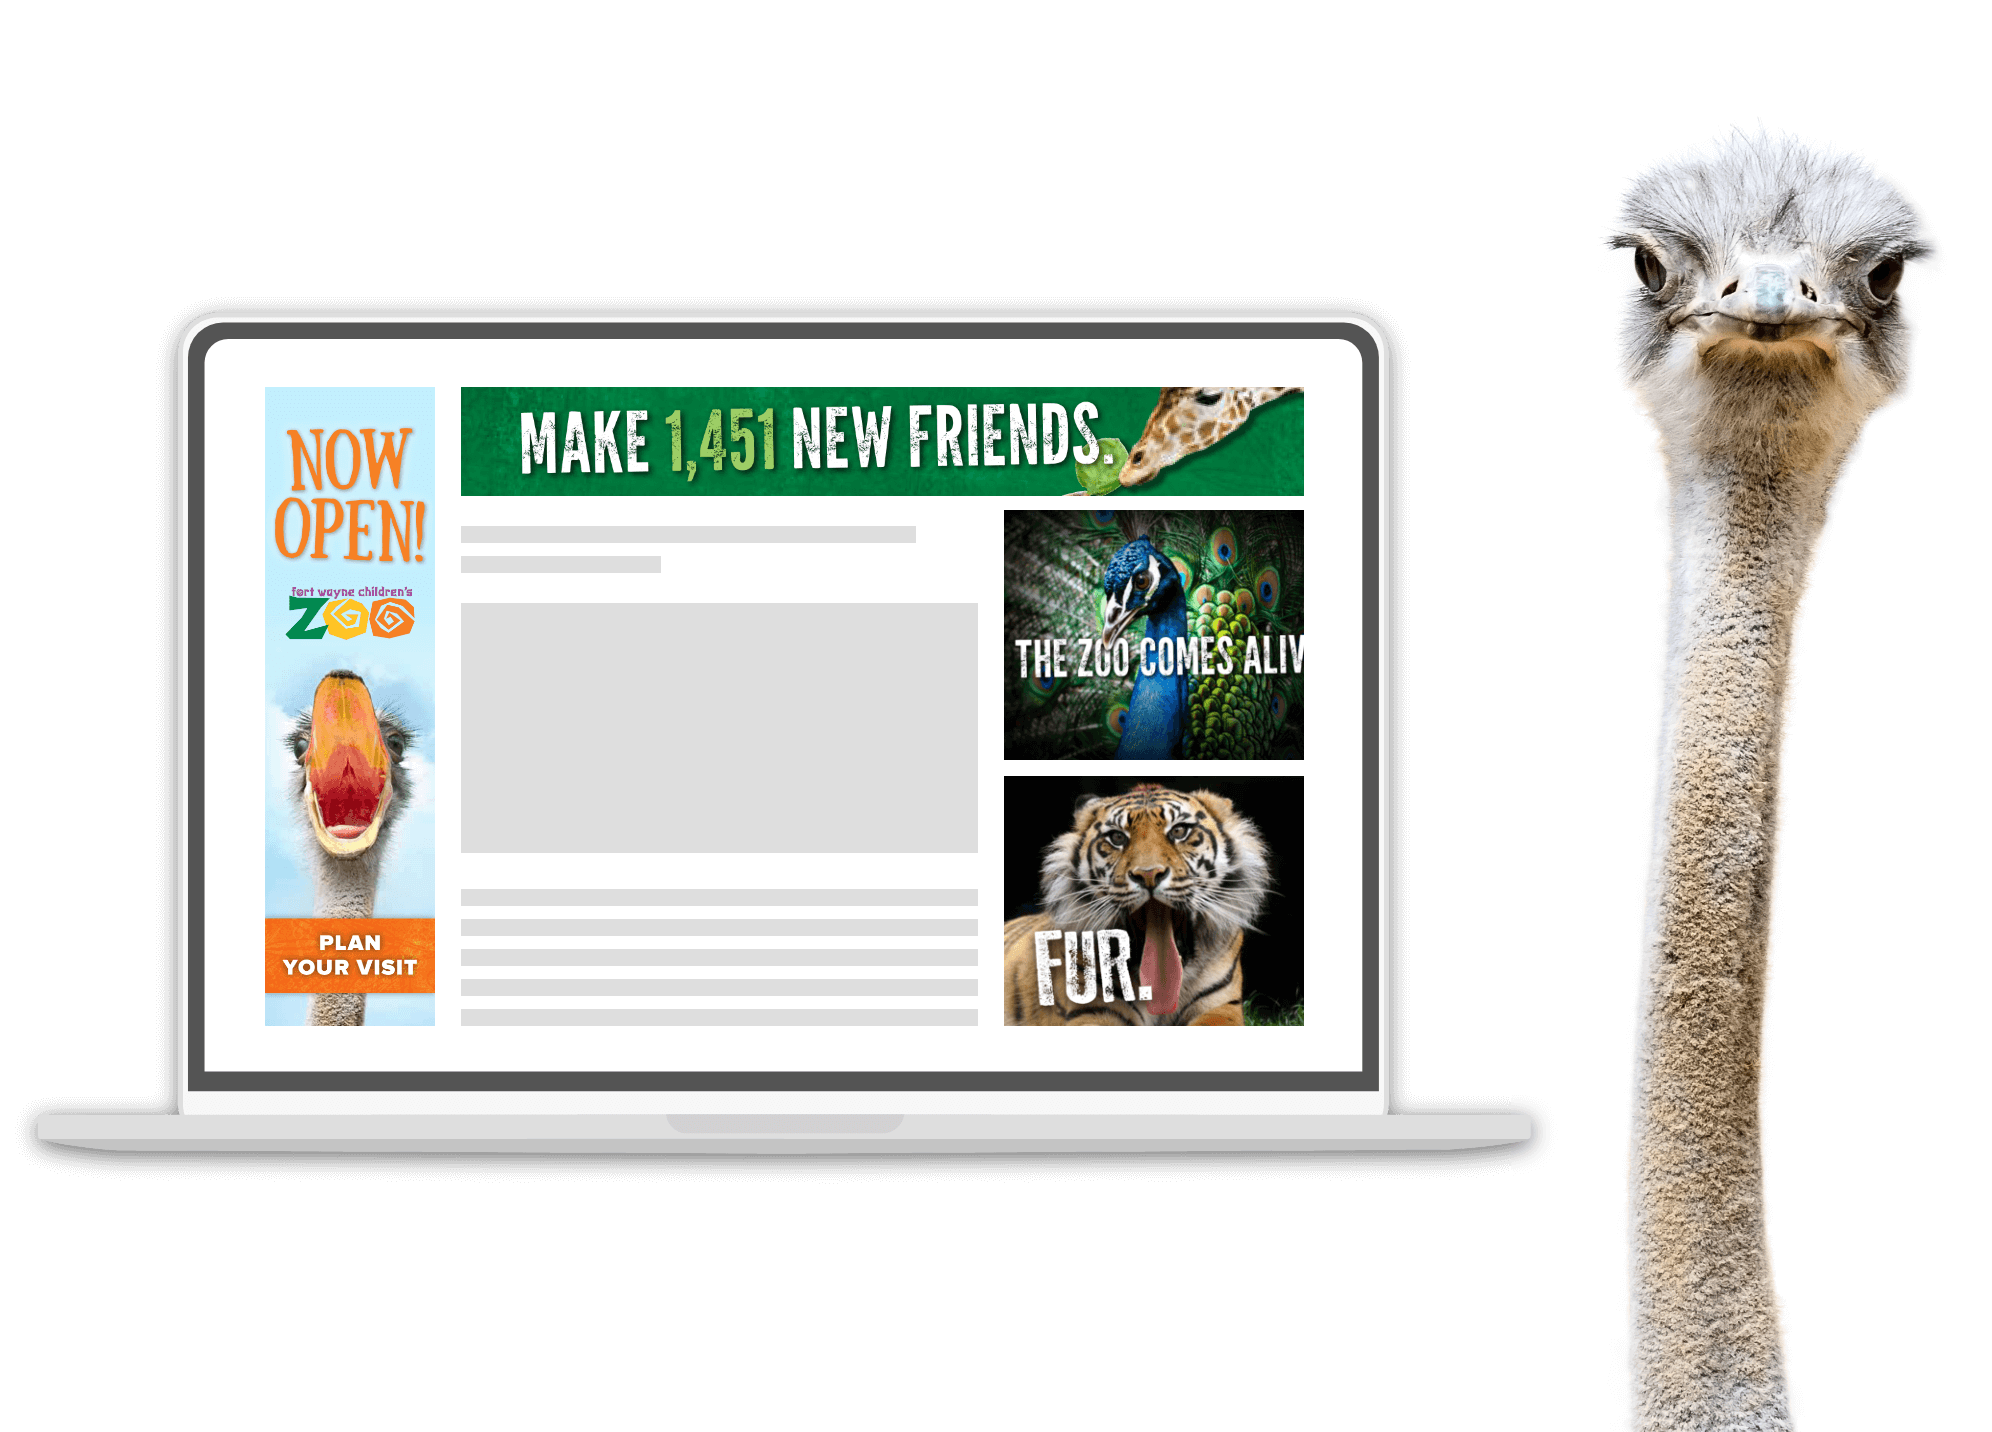 Fort Wayne Children's Zoo News Website Wireframe Design and Photography example (ostrich head)